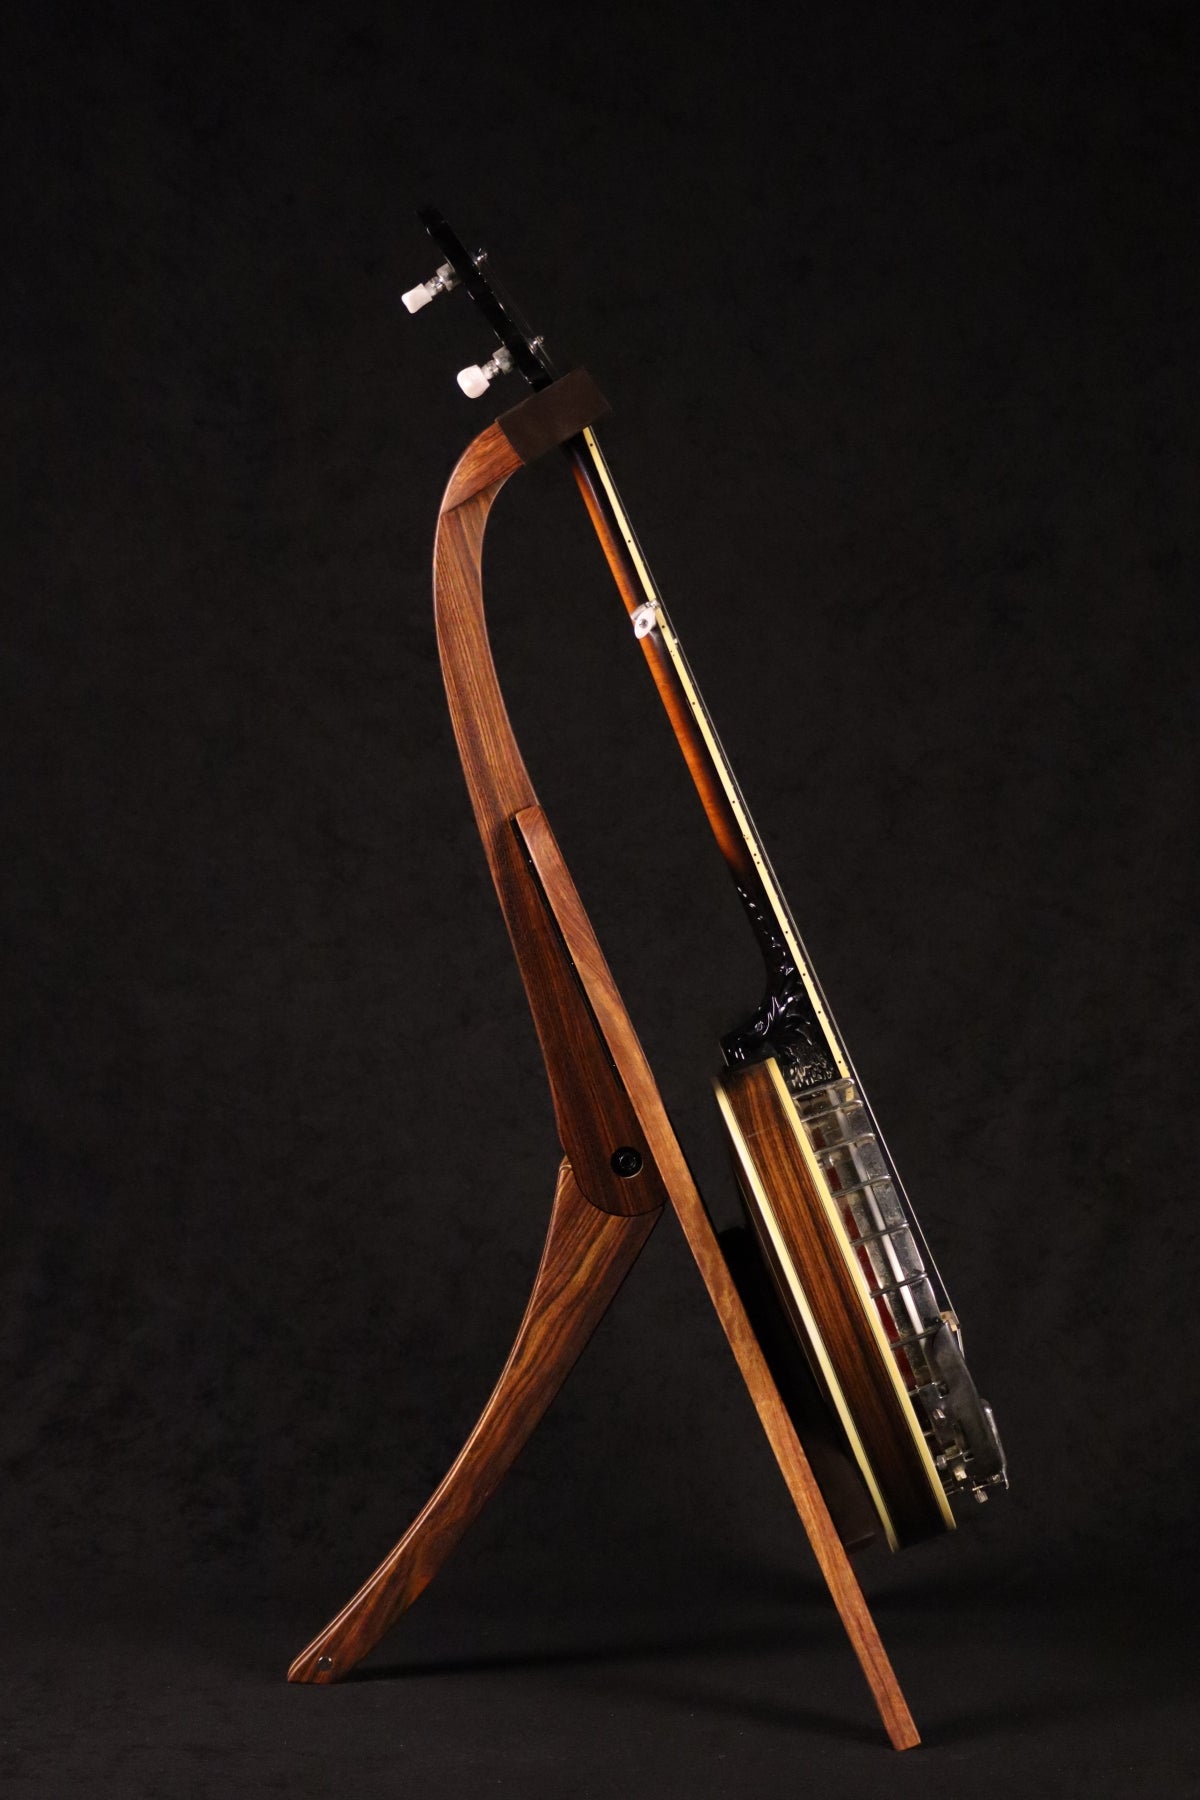 Folding chechen Caribbean rosewood and curly maple wood banjo floor stand full side image with Alvarez banjo